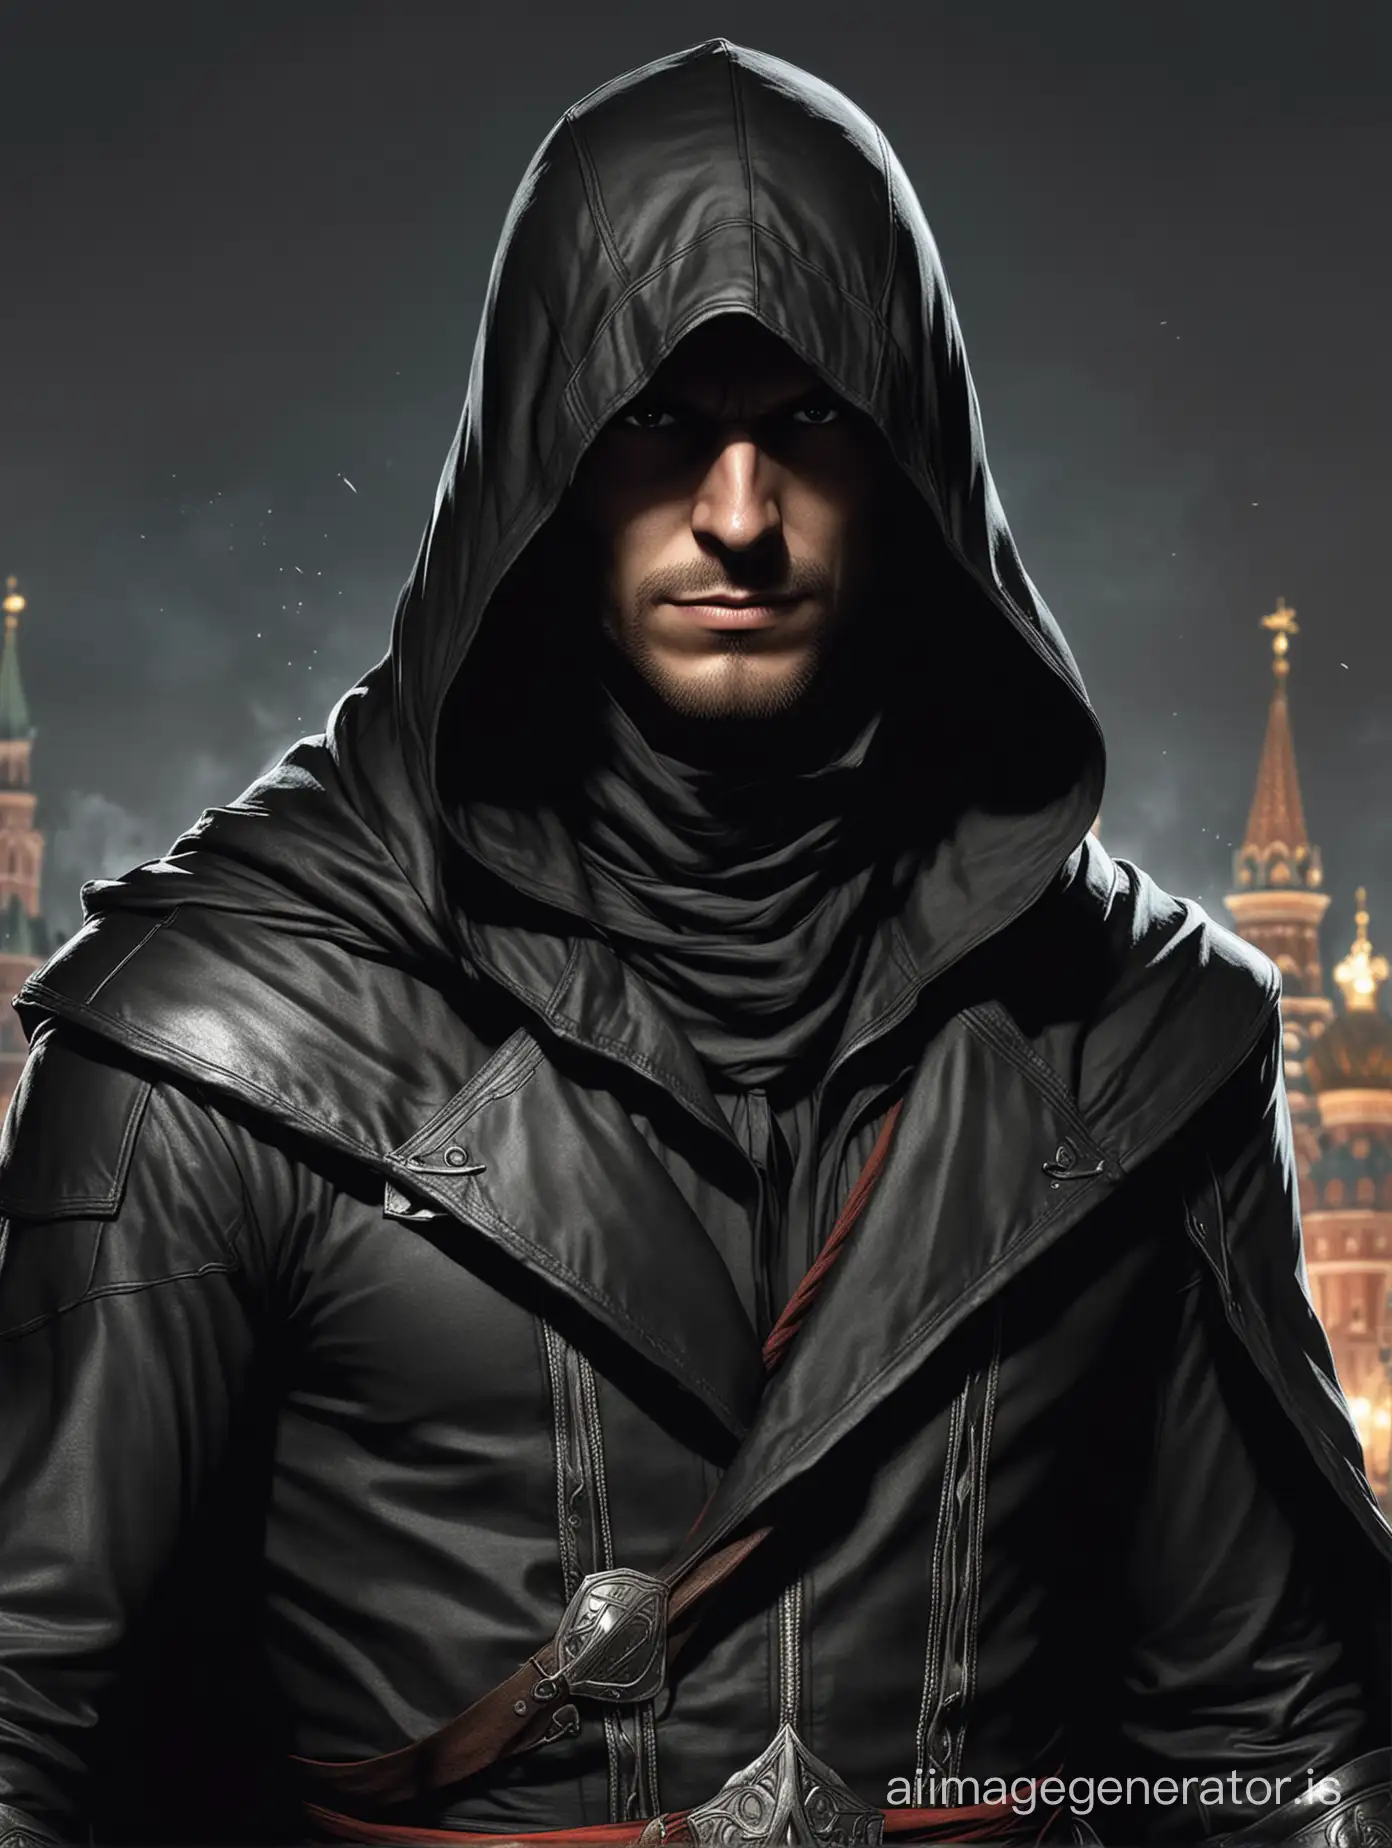 1930s-Moscow-ComicStyle-Assassin-in-Black-Cloak